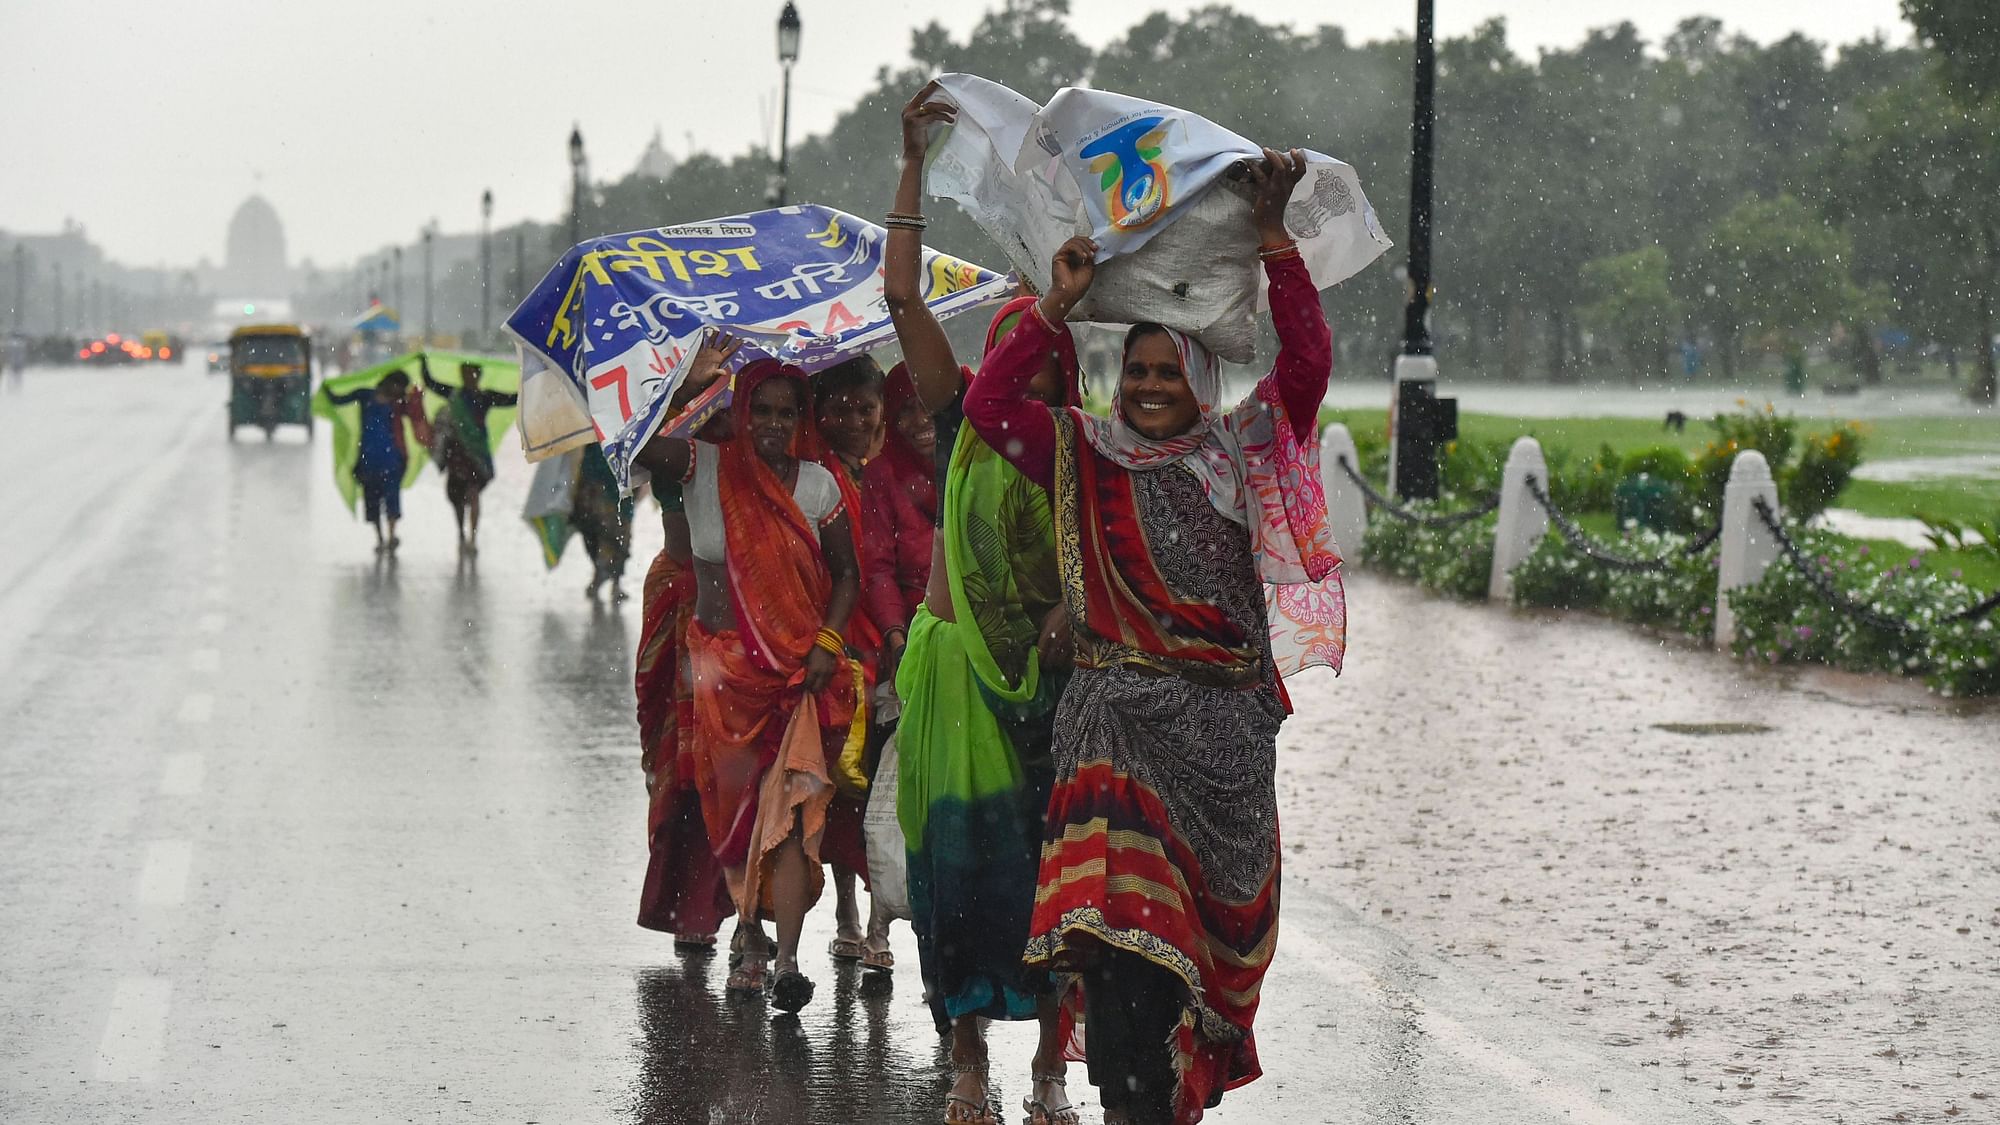 Women try to cover themselves with plastic banners as they walk along the Rajpath during rains, in New Delhi on Sunday, 21 July.